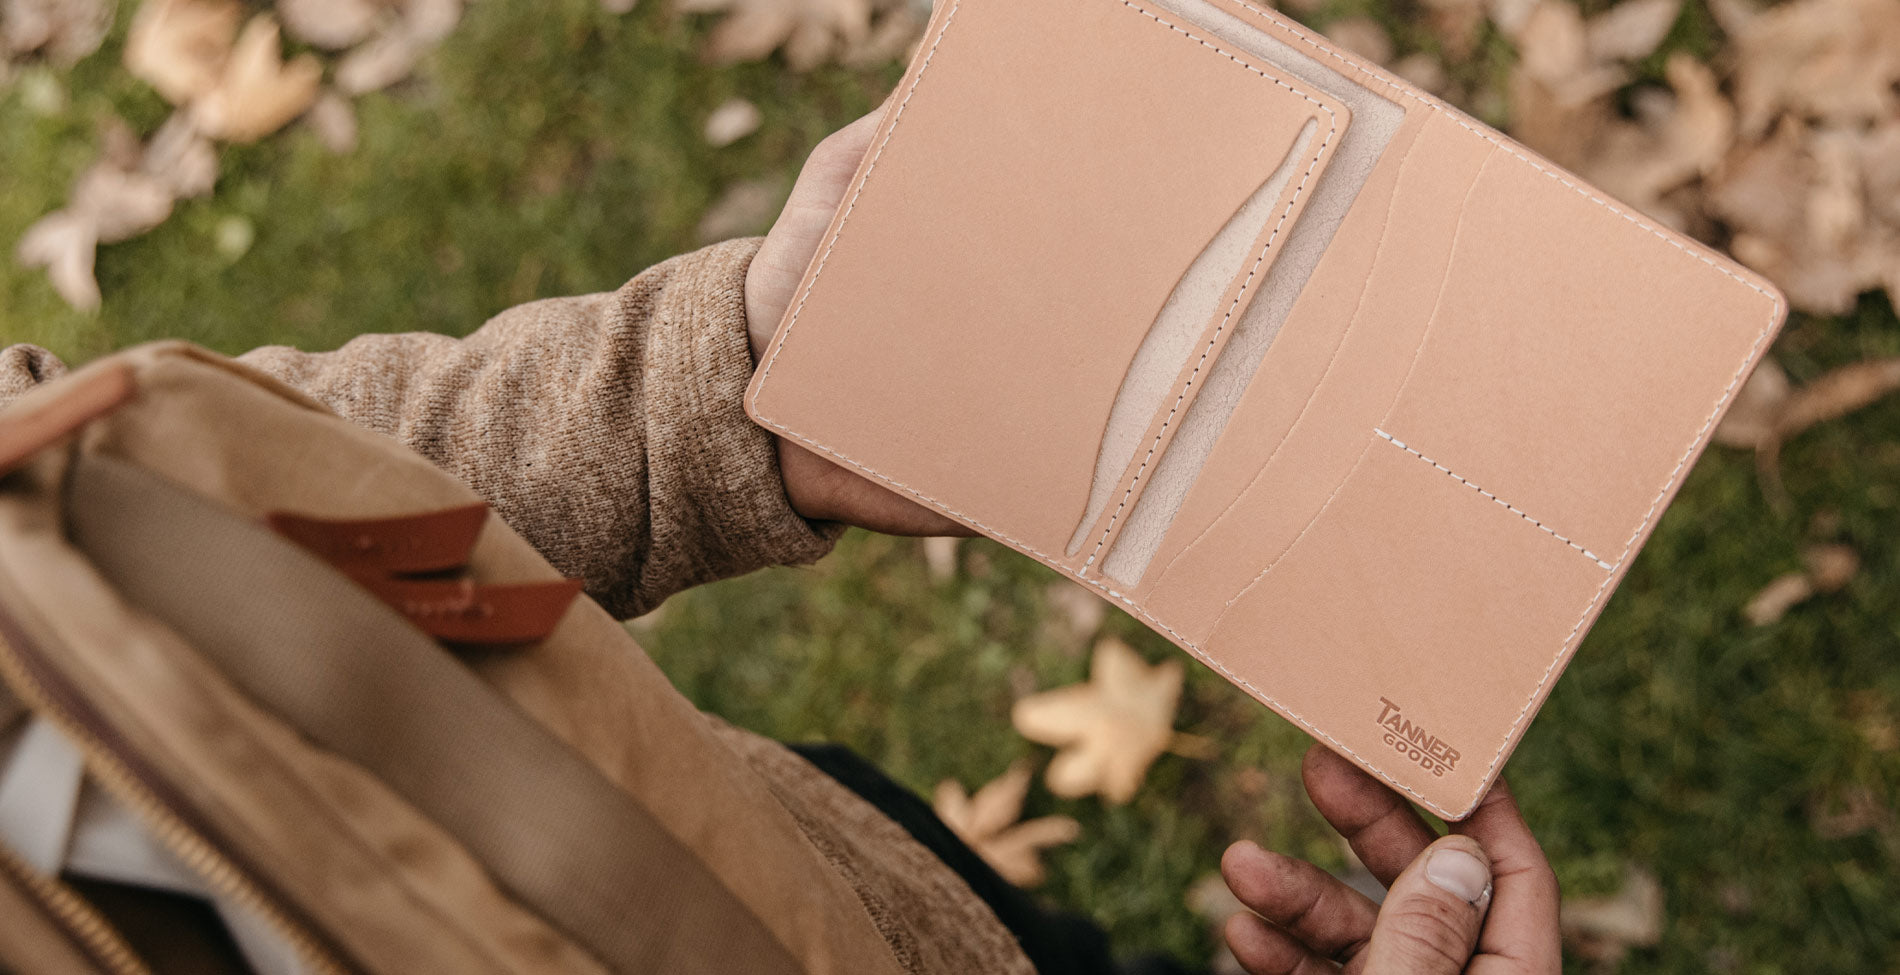 A Travel Wallet in natural leather being opened outside - the color of the leather matching the leaves on the grass.